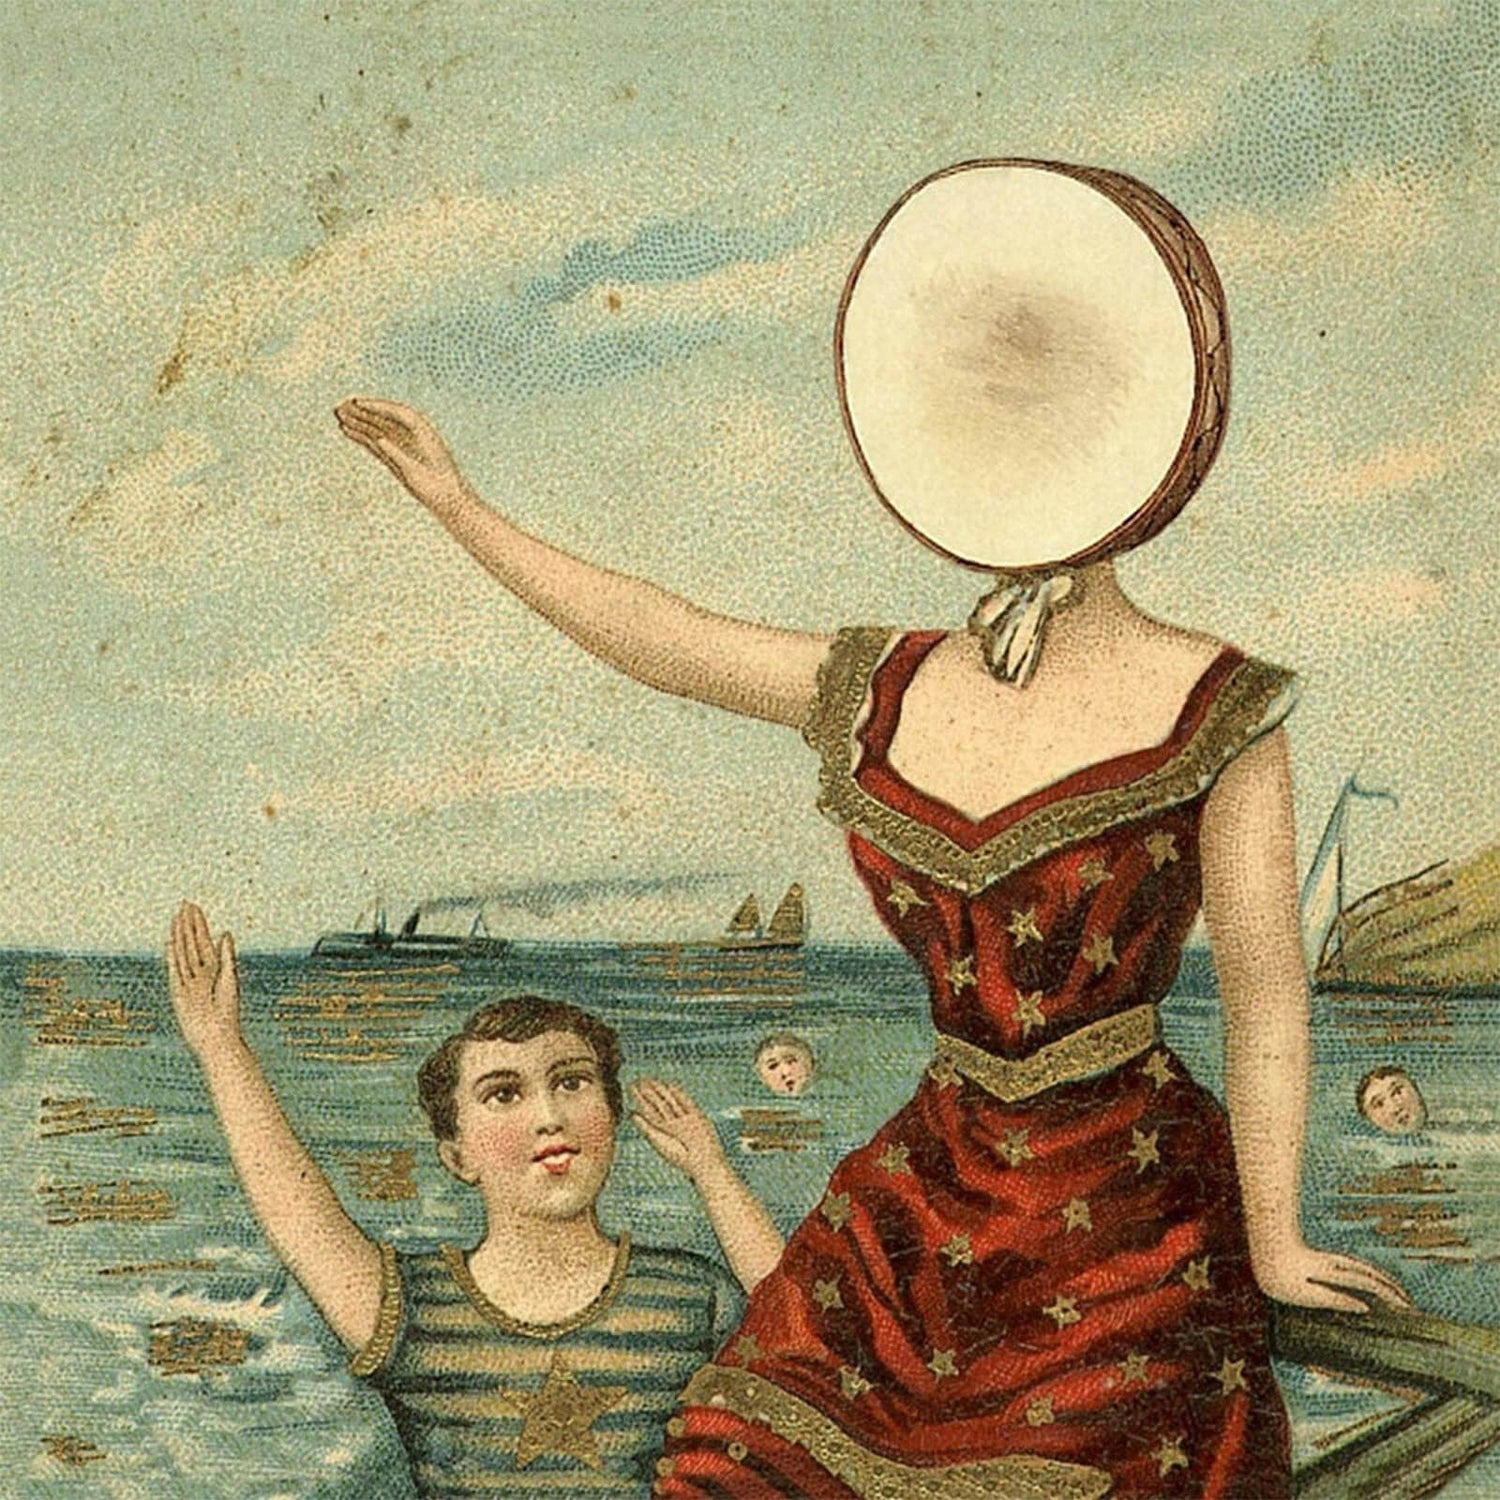 Neutral Milk Hotel - In The Aeroplane Over The Sea 180g LP